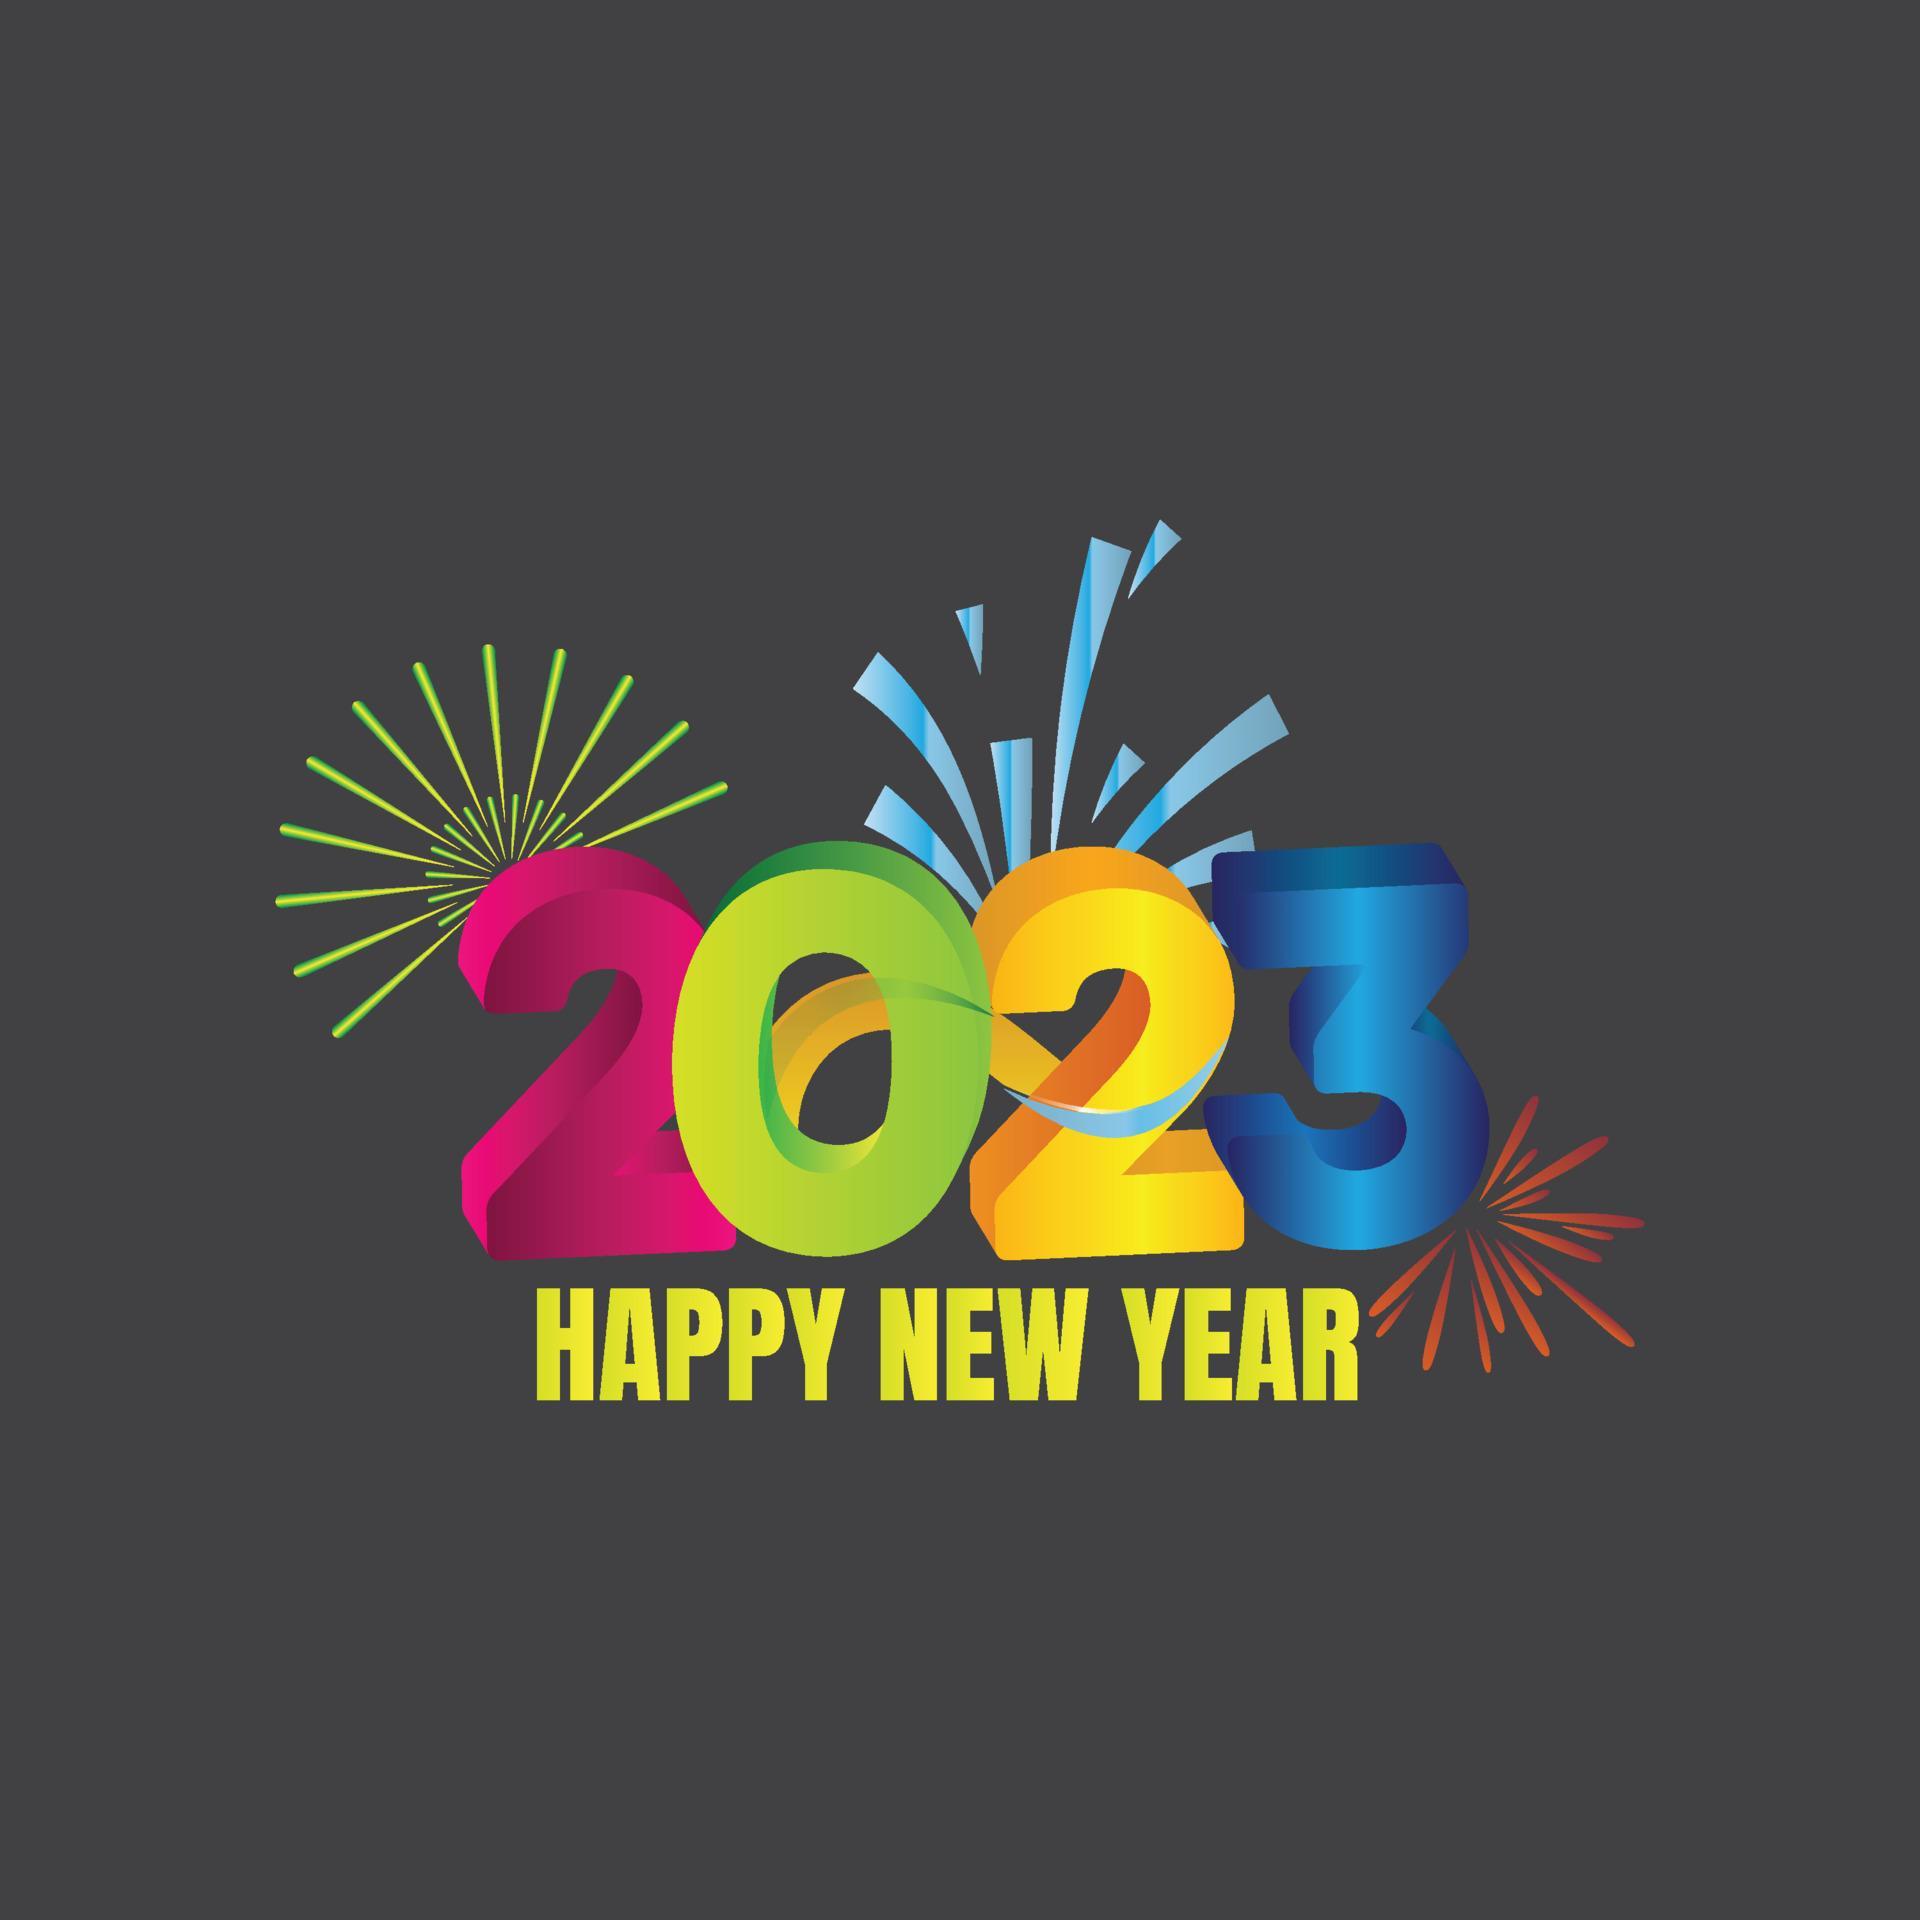 Colorful 3d Happy New Year 2023 Image Free Vector